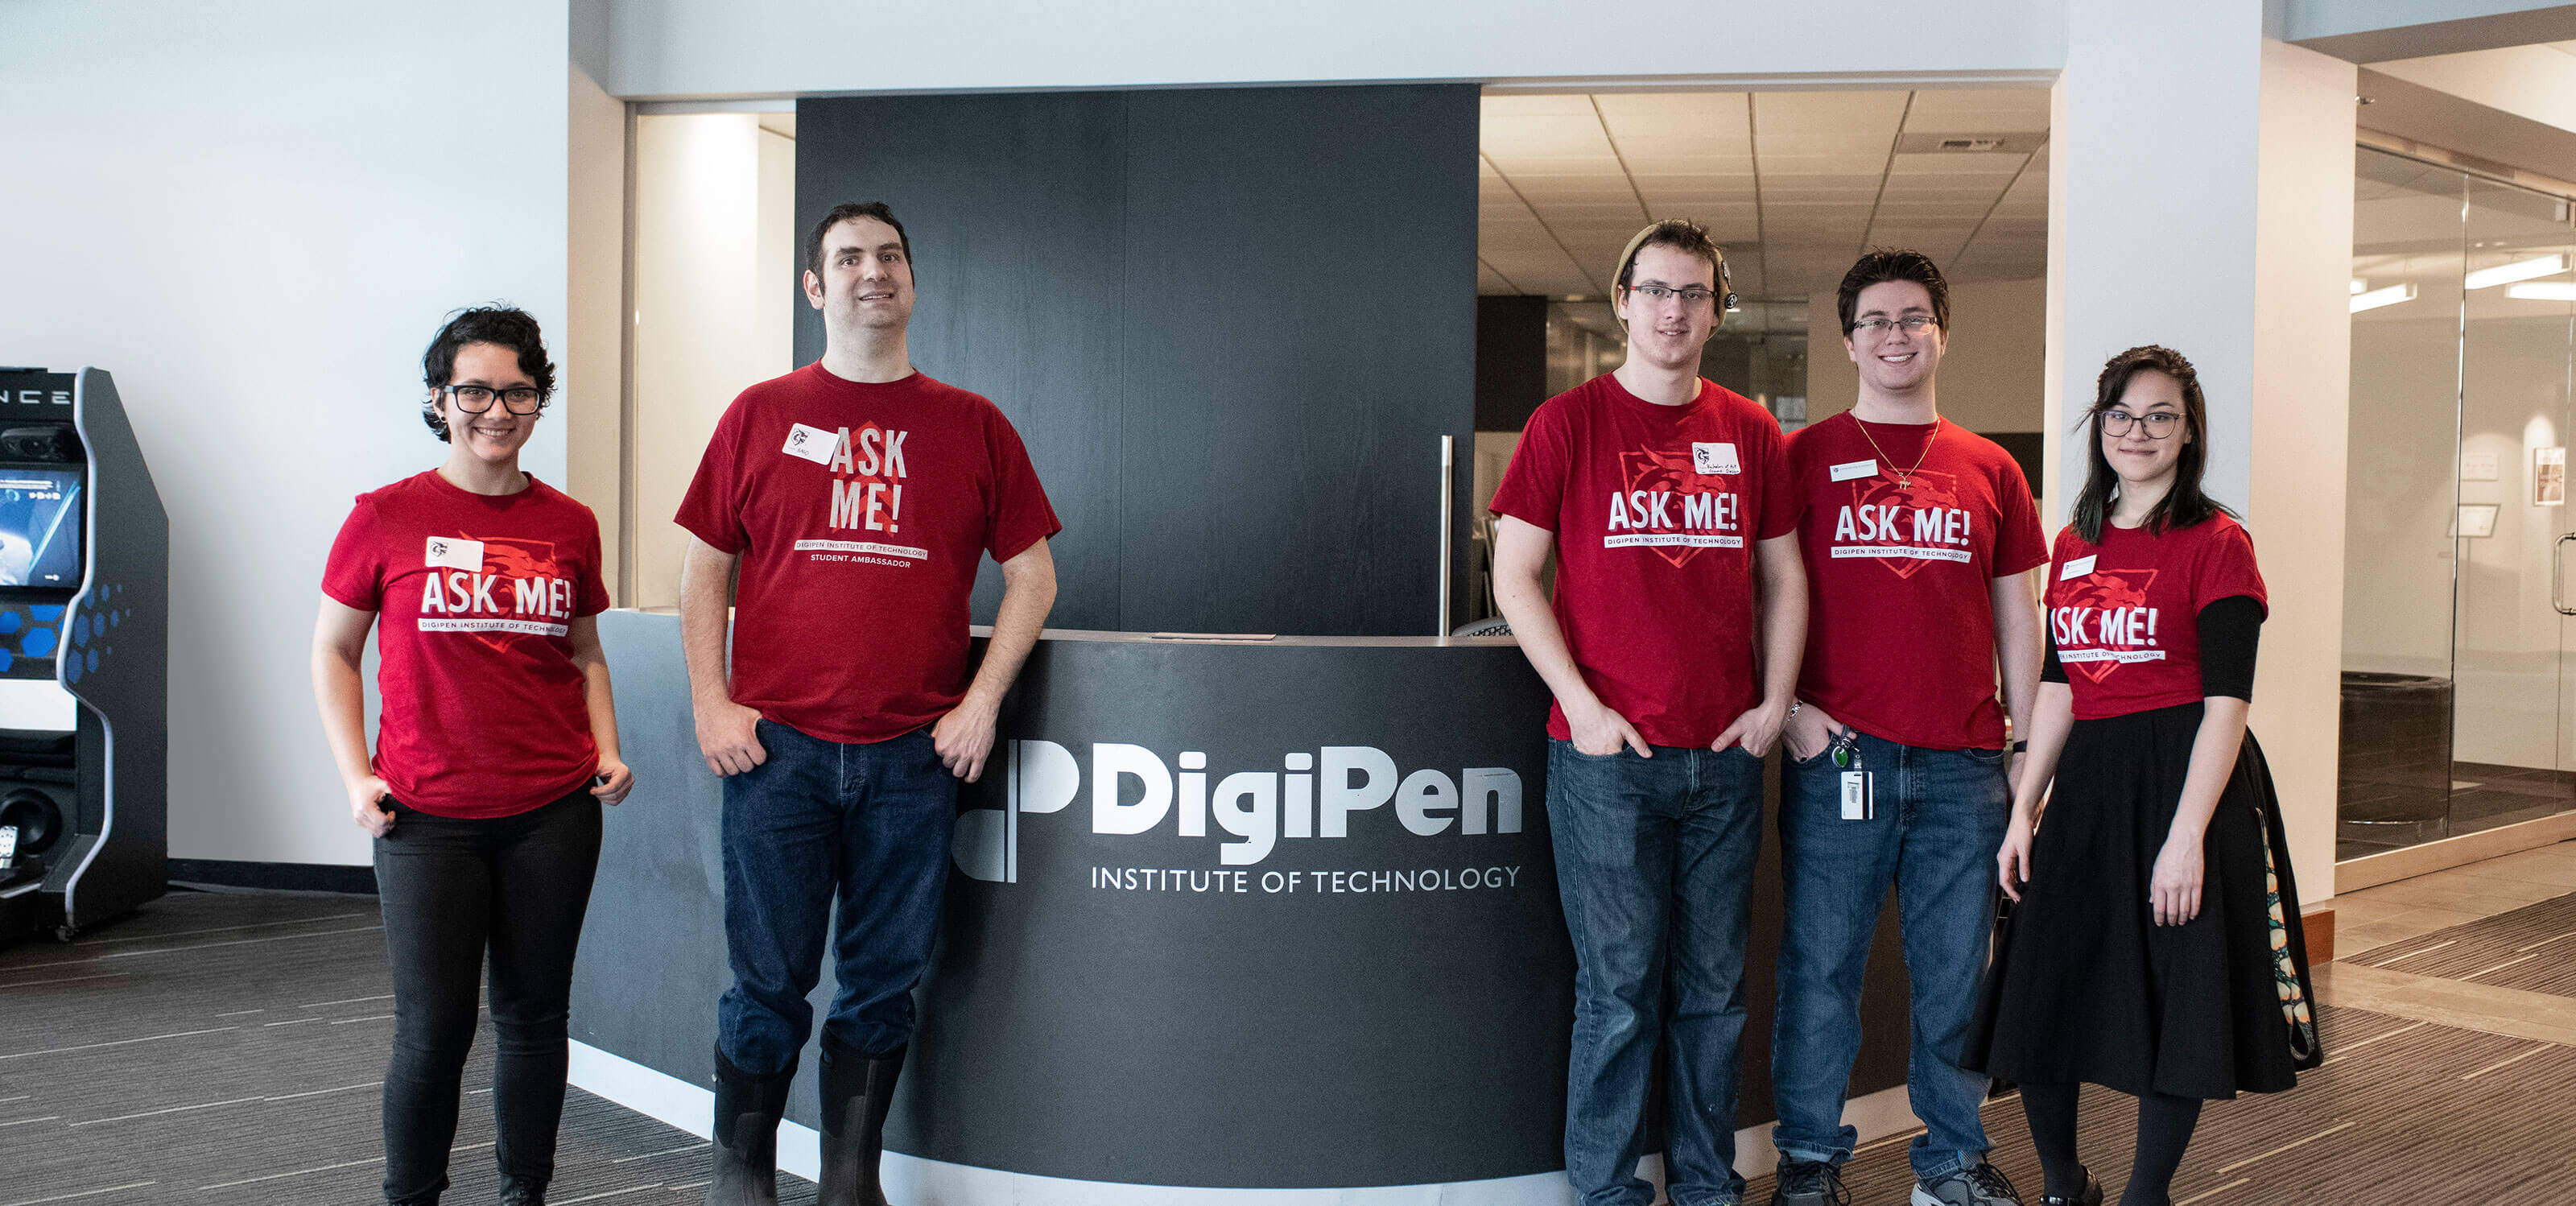 Five people in red t-shirts stand in front of a black desk with DigiPen Institute of Technology written in white letters.